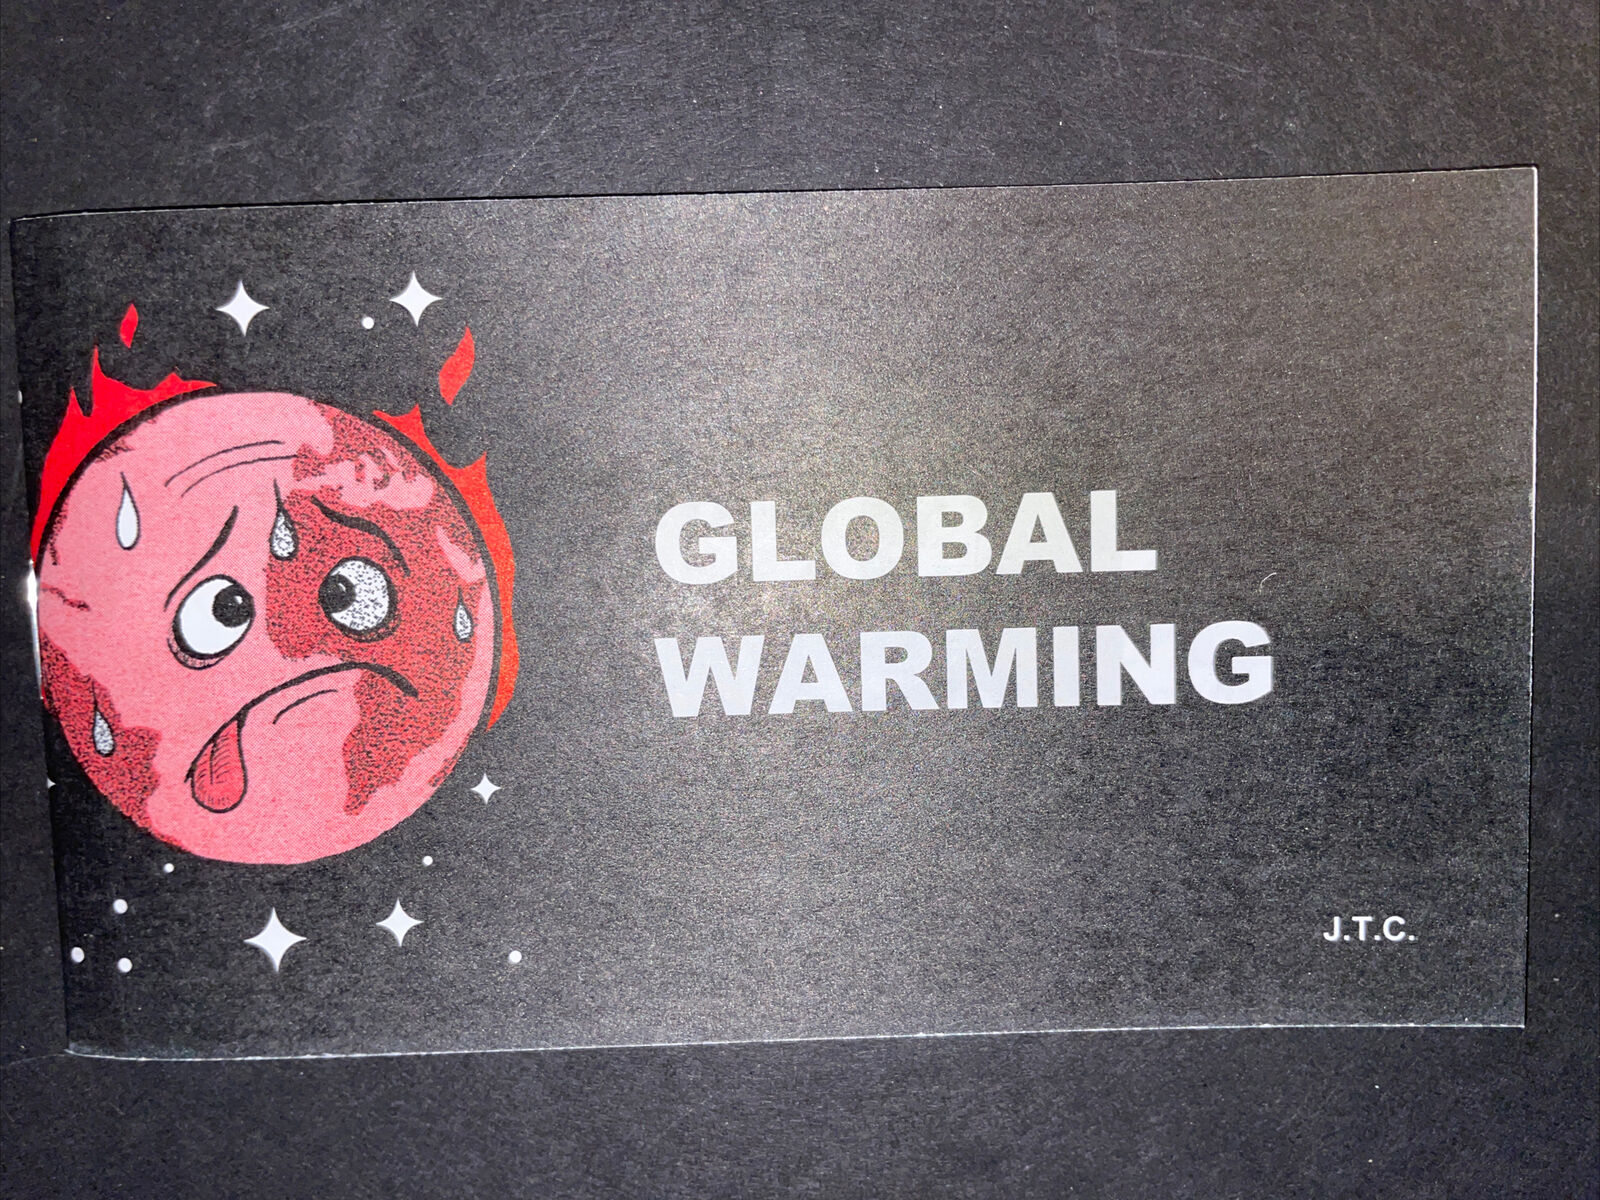 JACK CHICK PUBLICATIONS TRACT JTC COMIC “GLOBAL WARMING”